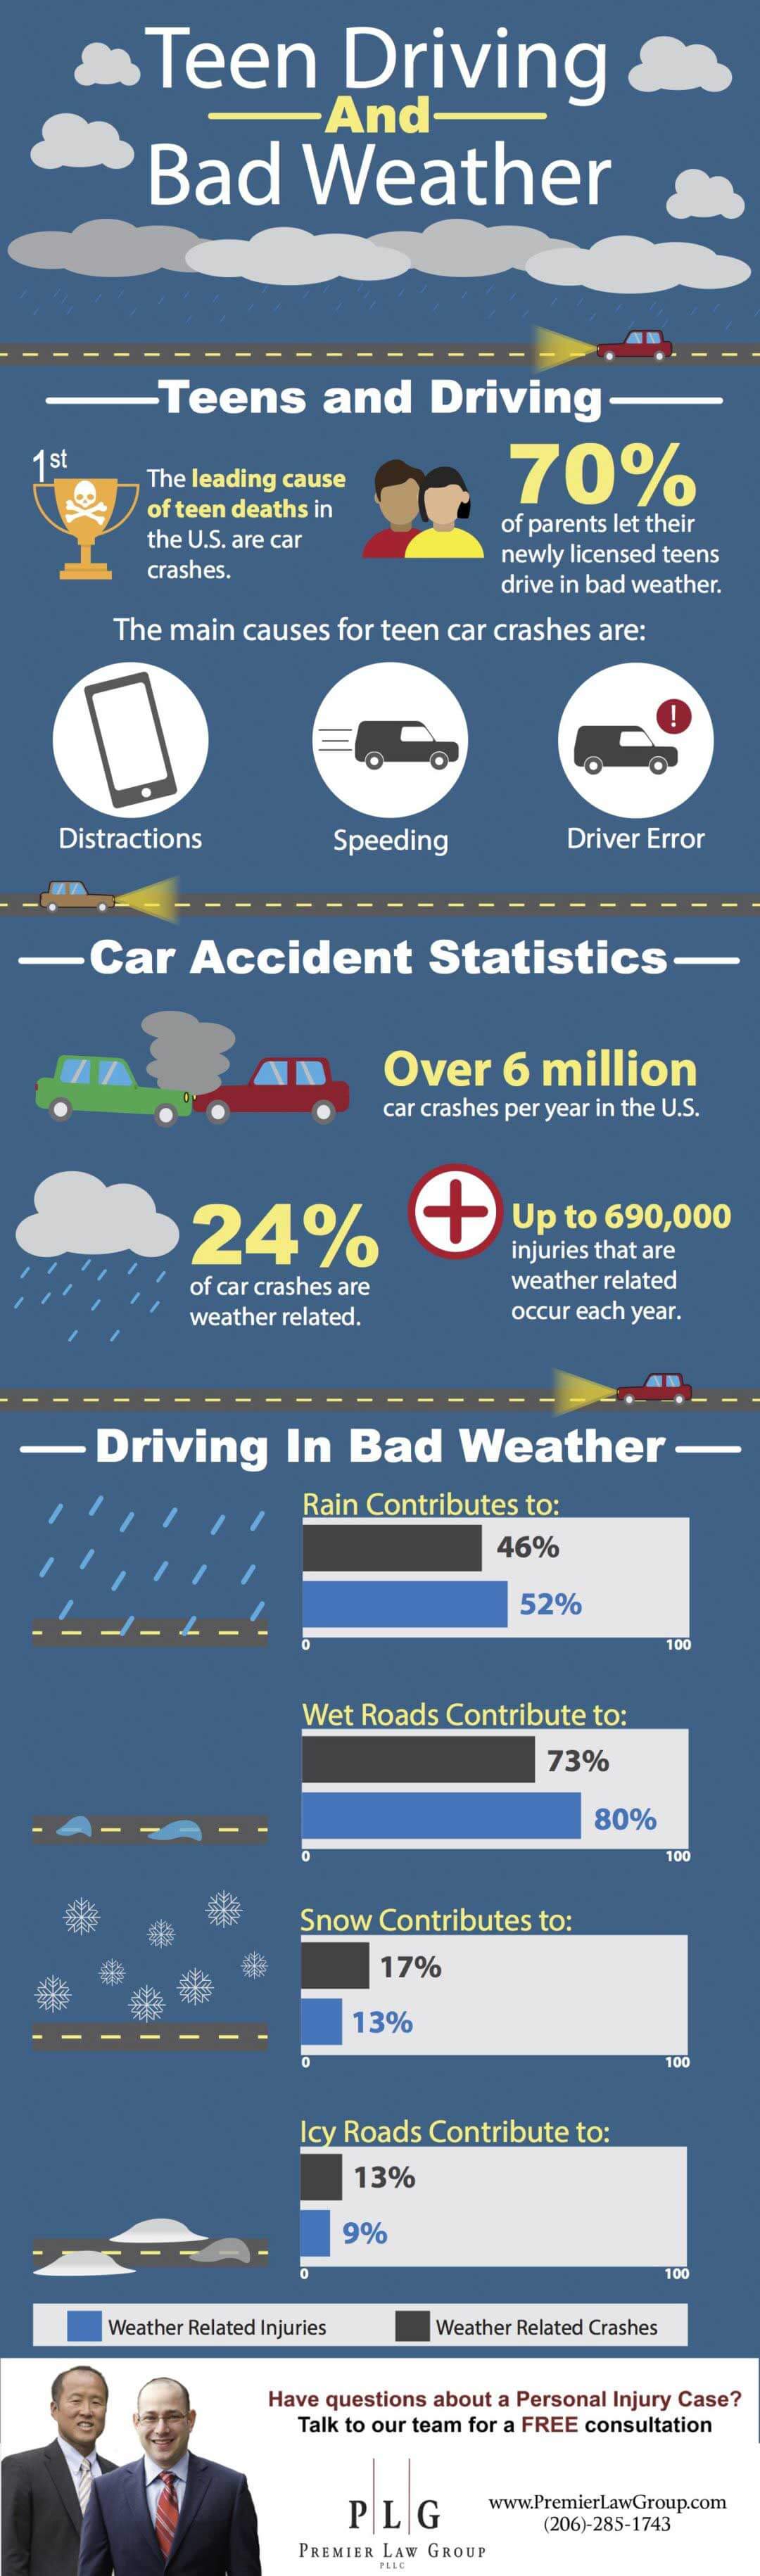 Teen Driving and Bad Weather Infographic